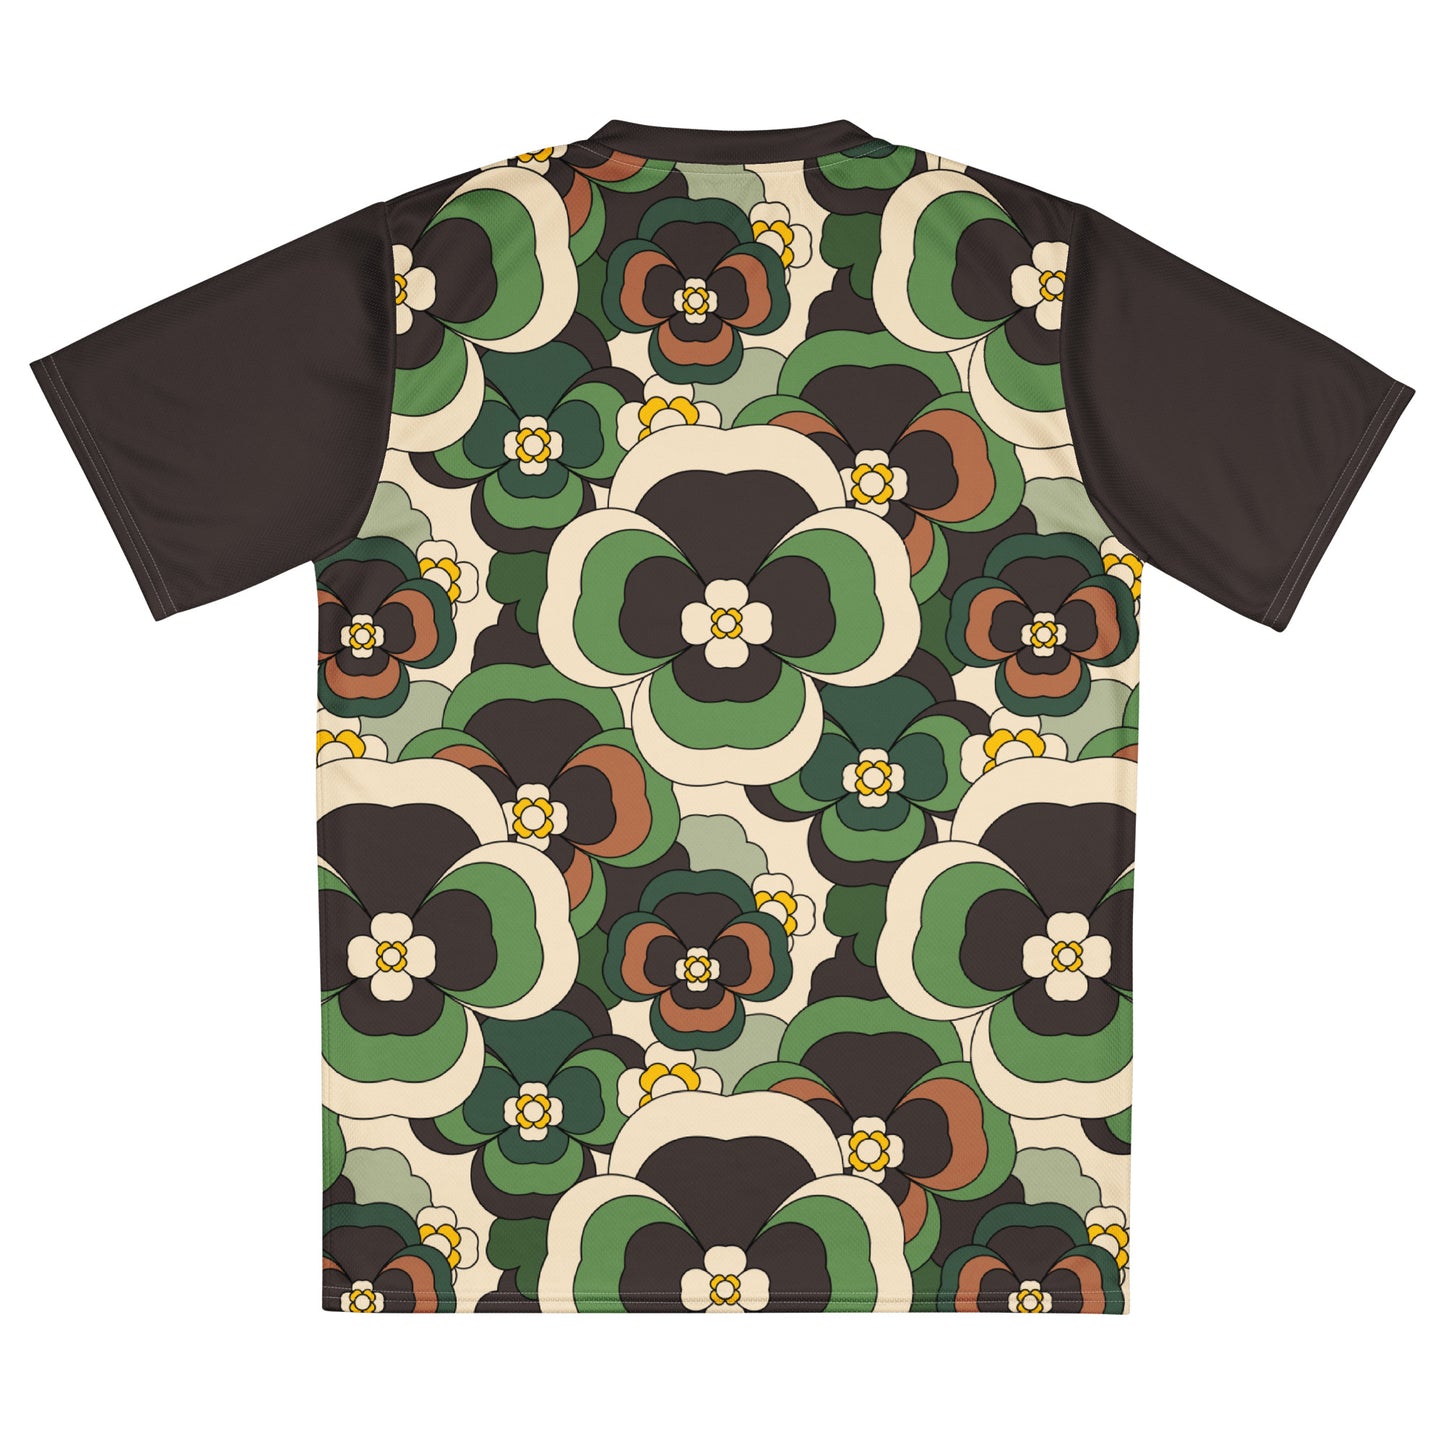 PANSY FANTASY green - Recycled unisex sports jersey